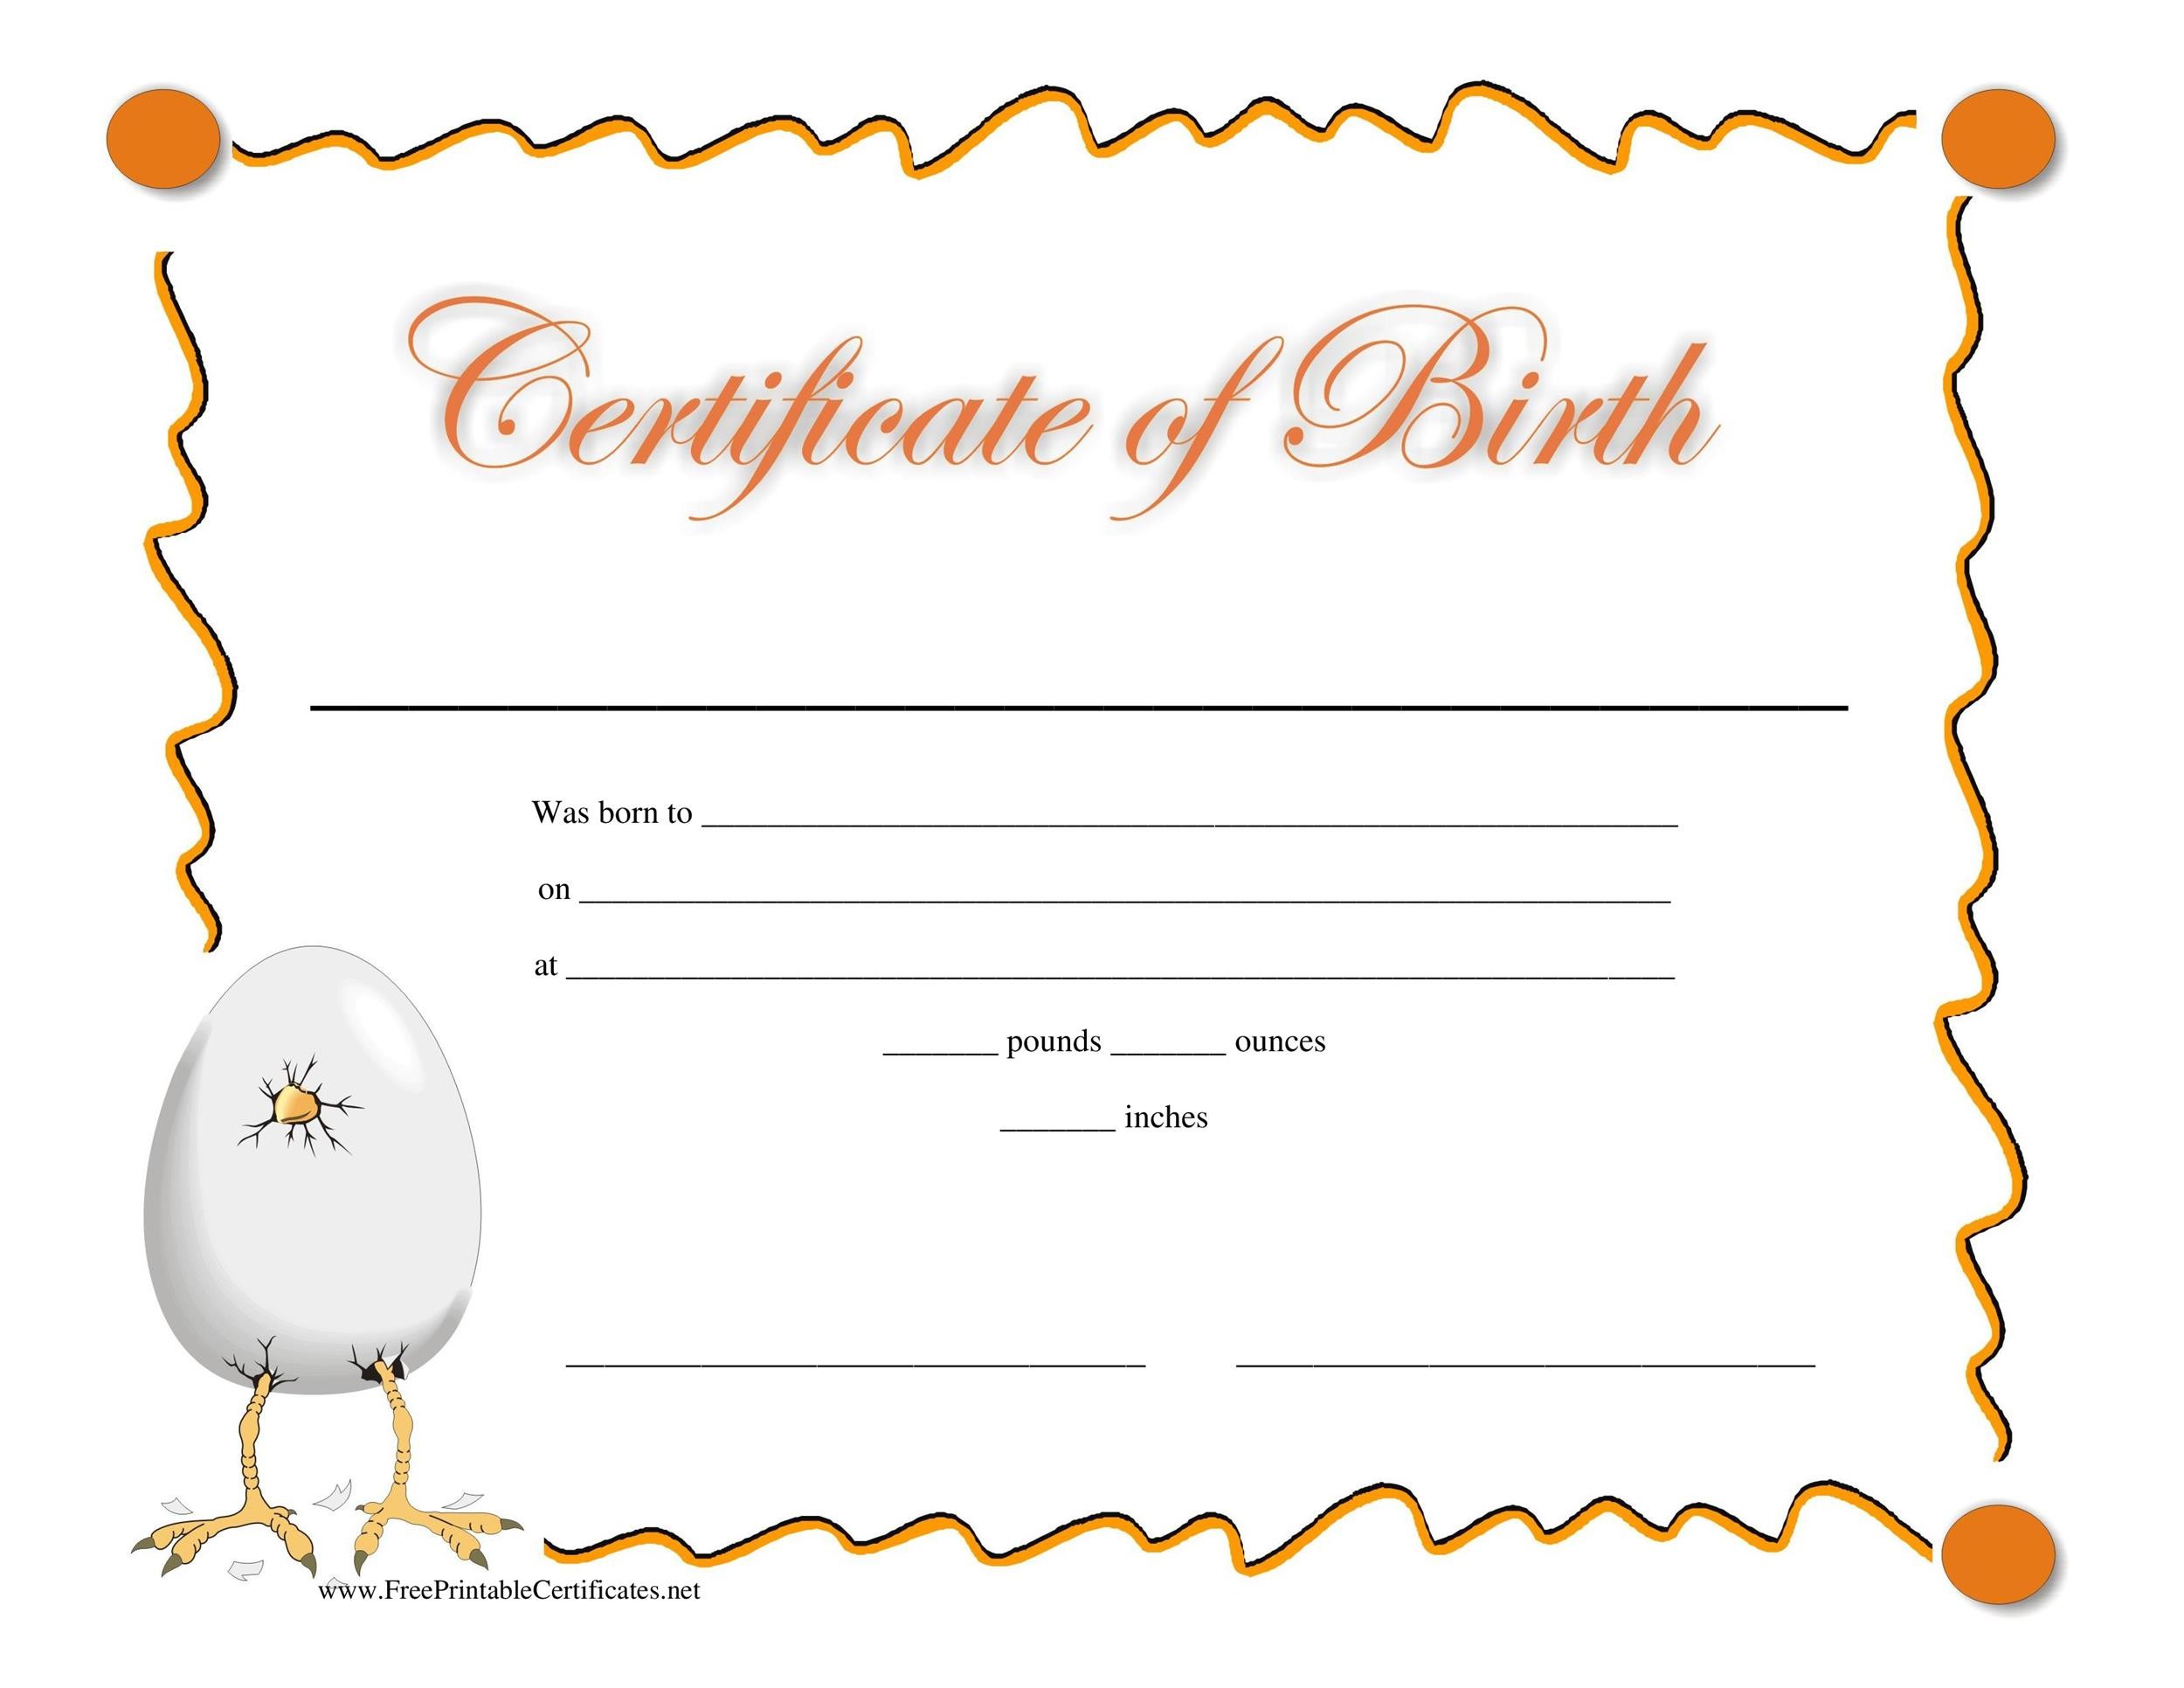 BIRTH CERTIFICATE - FAQ With Regard To Baby Death Certificate Template